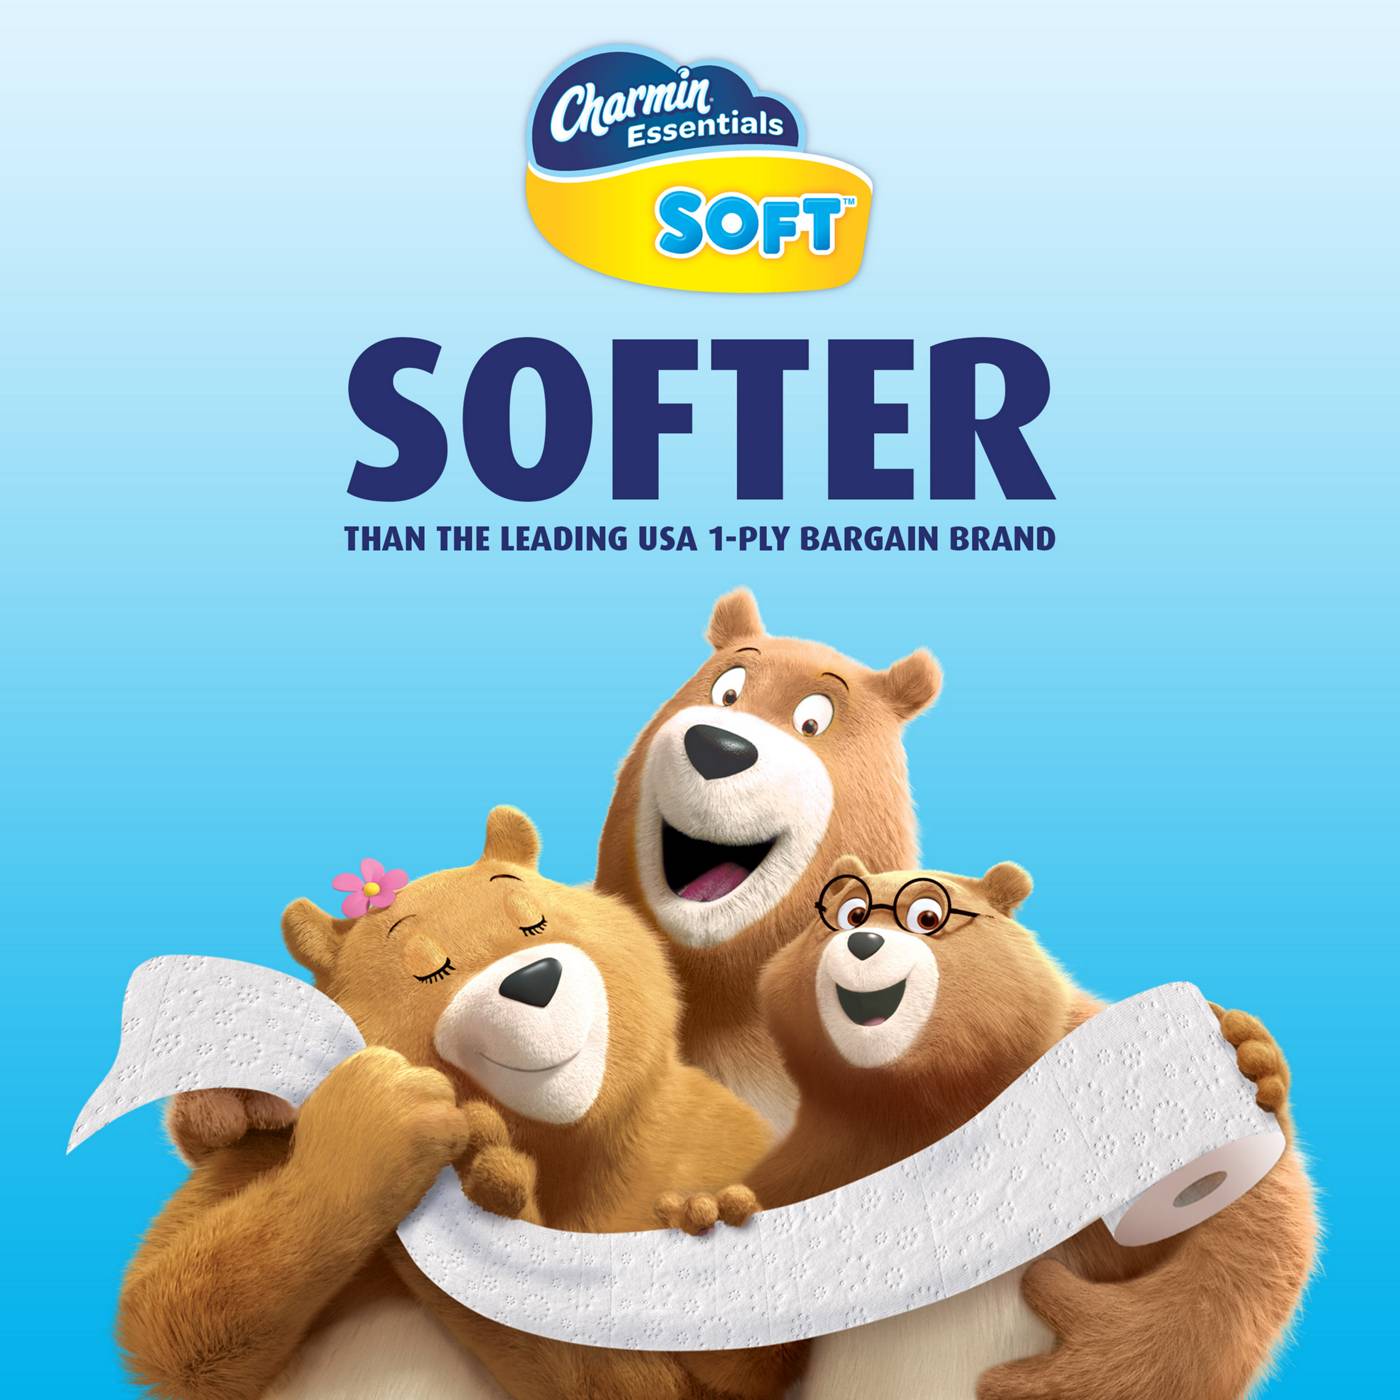 Charmin Essentials Soft Toilet Paper; image 10 of 13